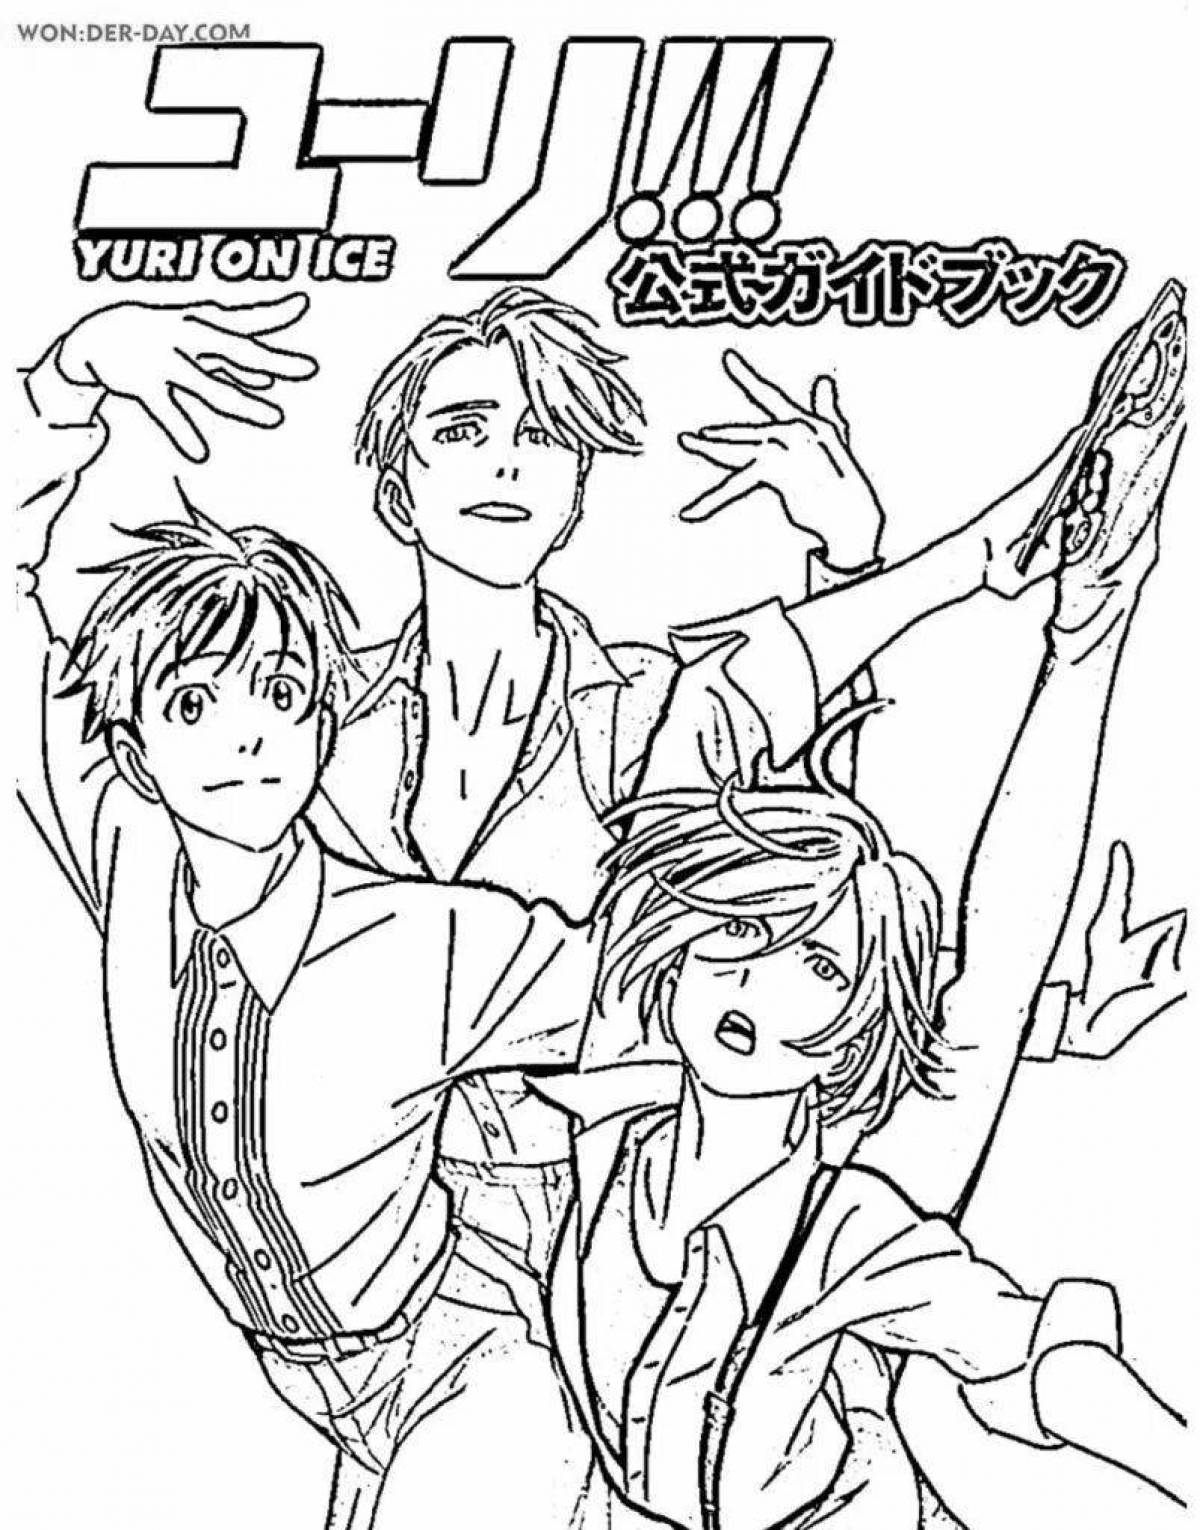 Animated yuri on ice coloring page